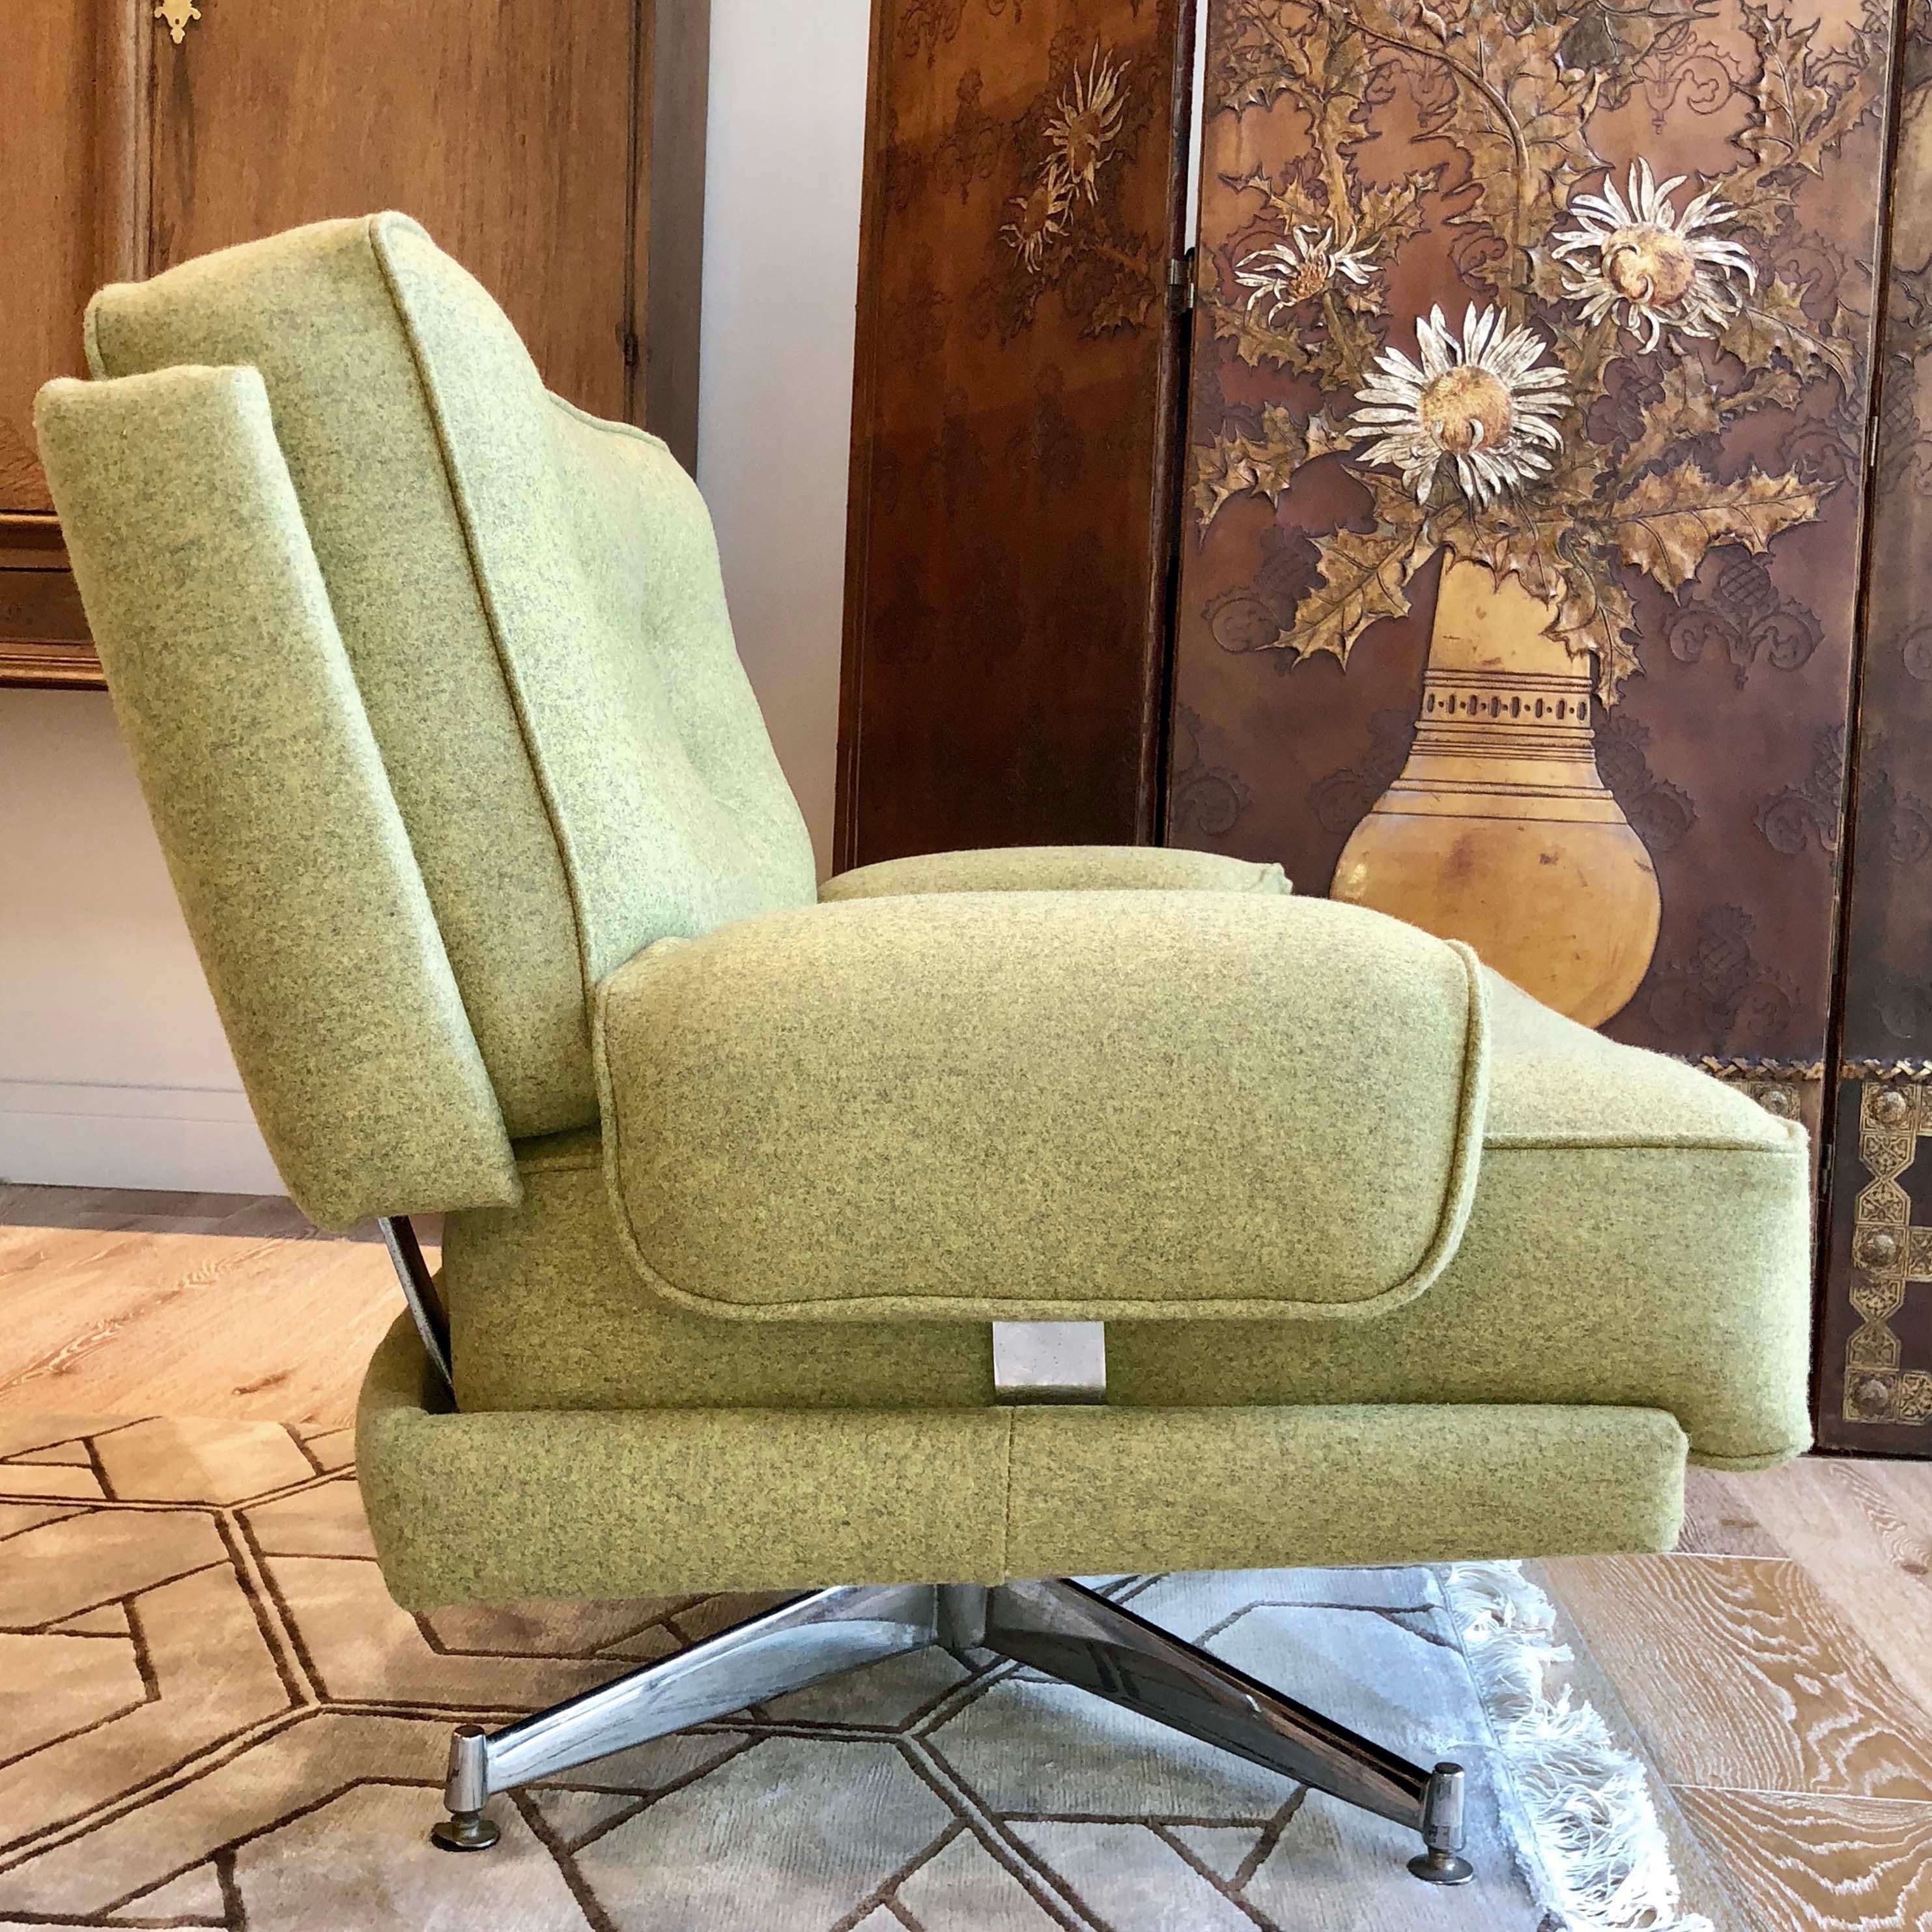 Kohinoor lounge low-back armchair designed by Howard Keith from 1970s. Possibly the most comfortable swivel armchair ever built, which is also a very Classic statement piece. Newly re-upholstered with a mustard/greenish/ lemon zest colour Scottish